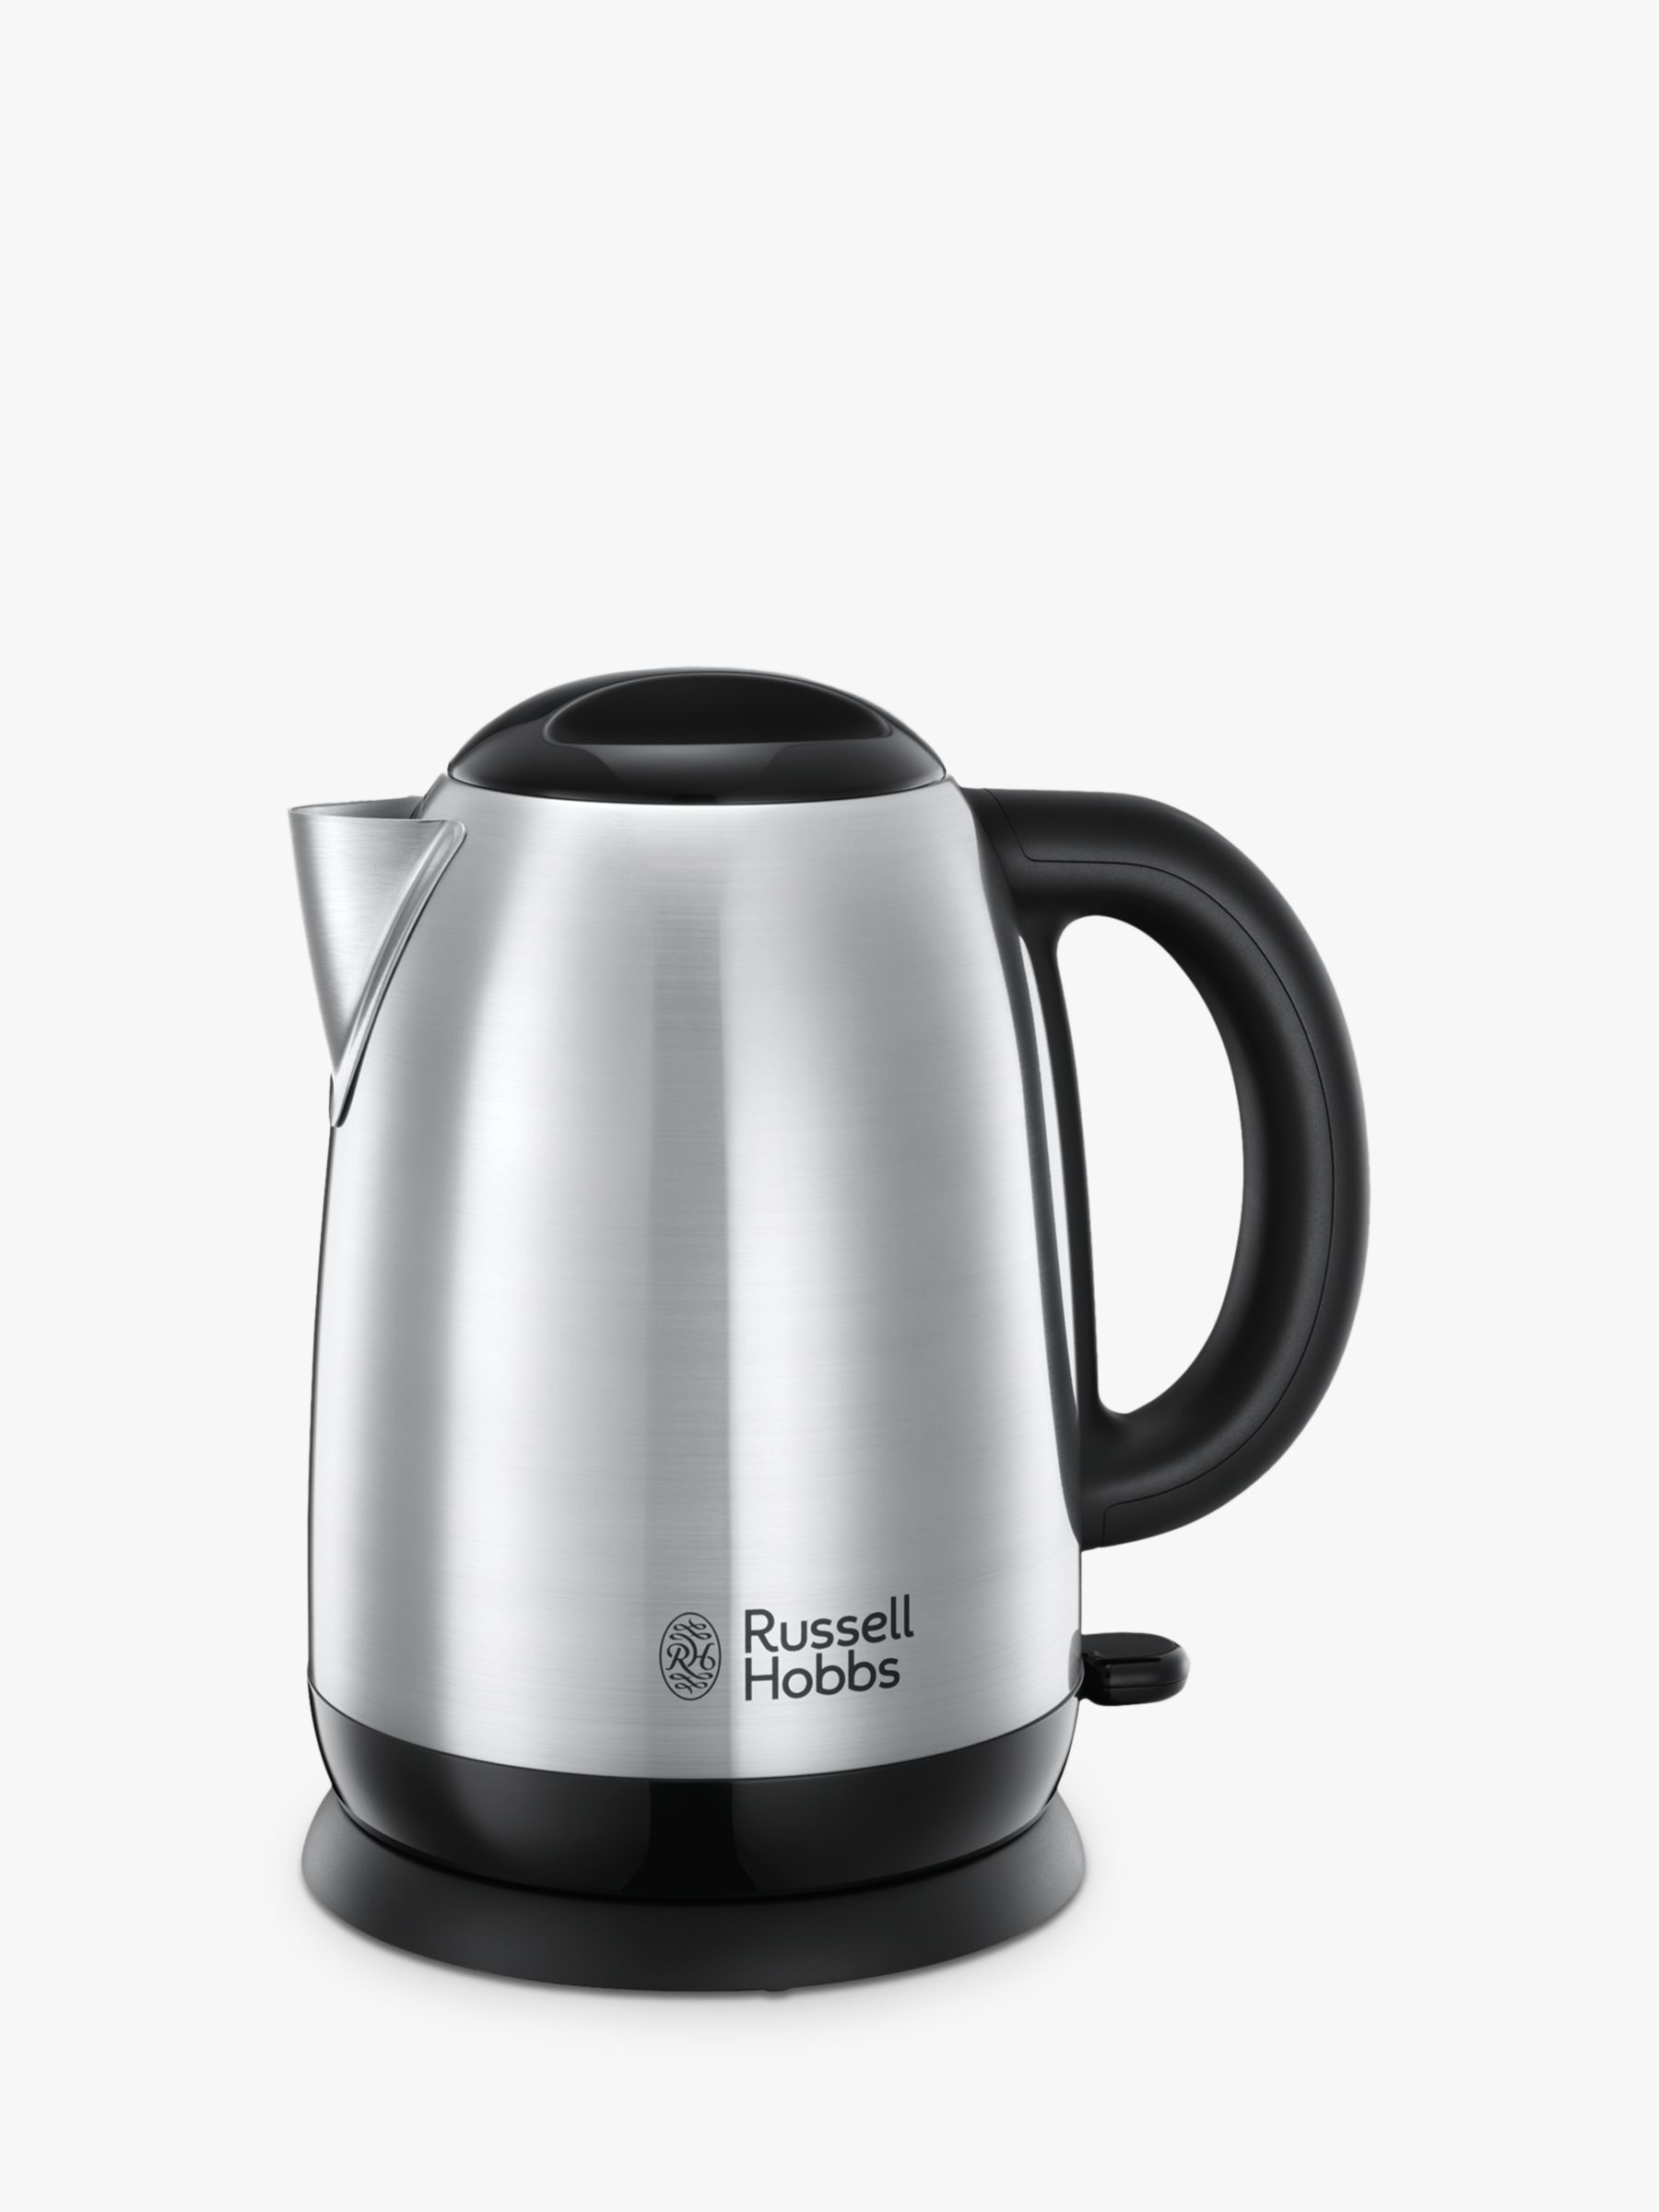 Russell Hobbs Kettles: Types, Features & Benefits